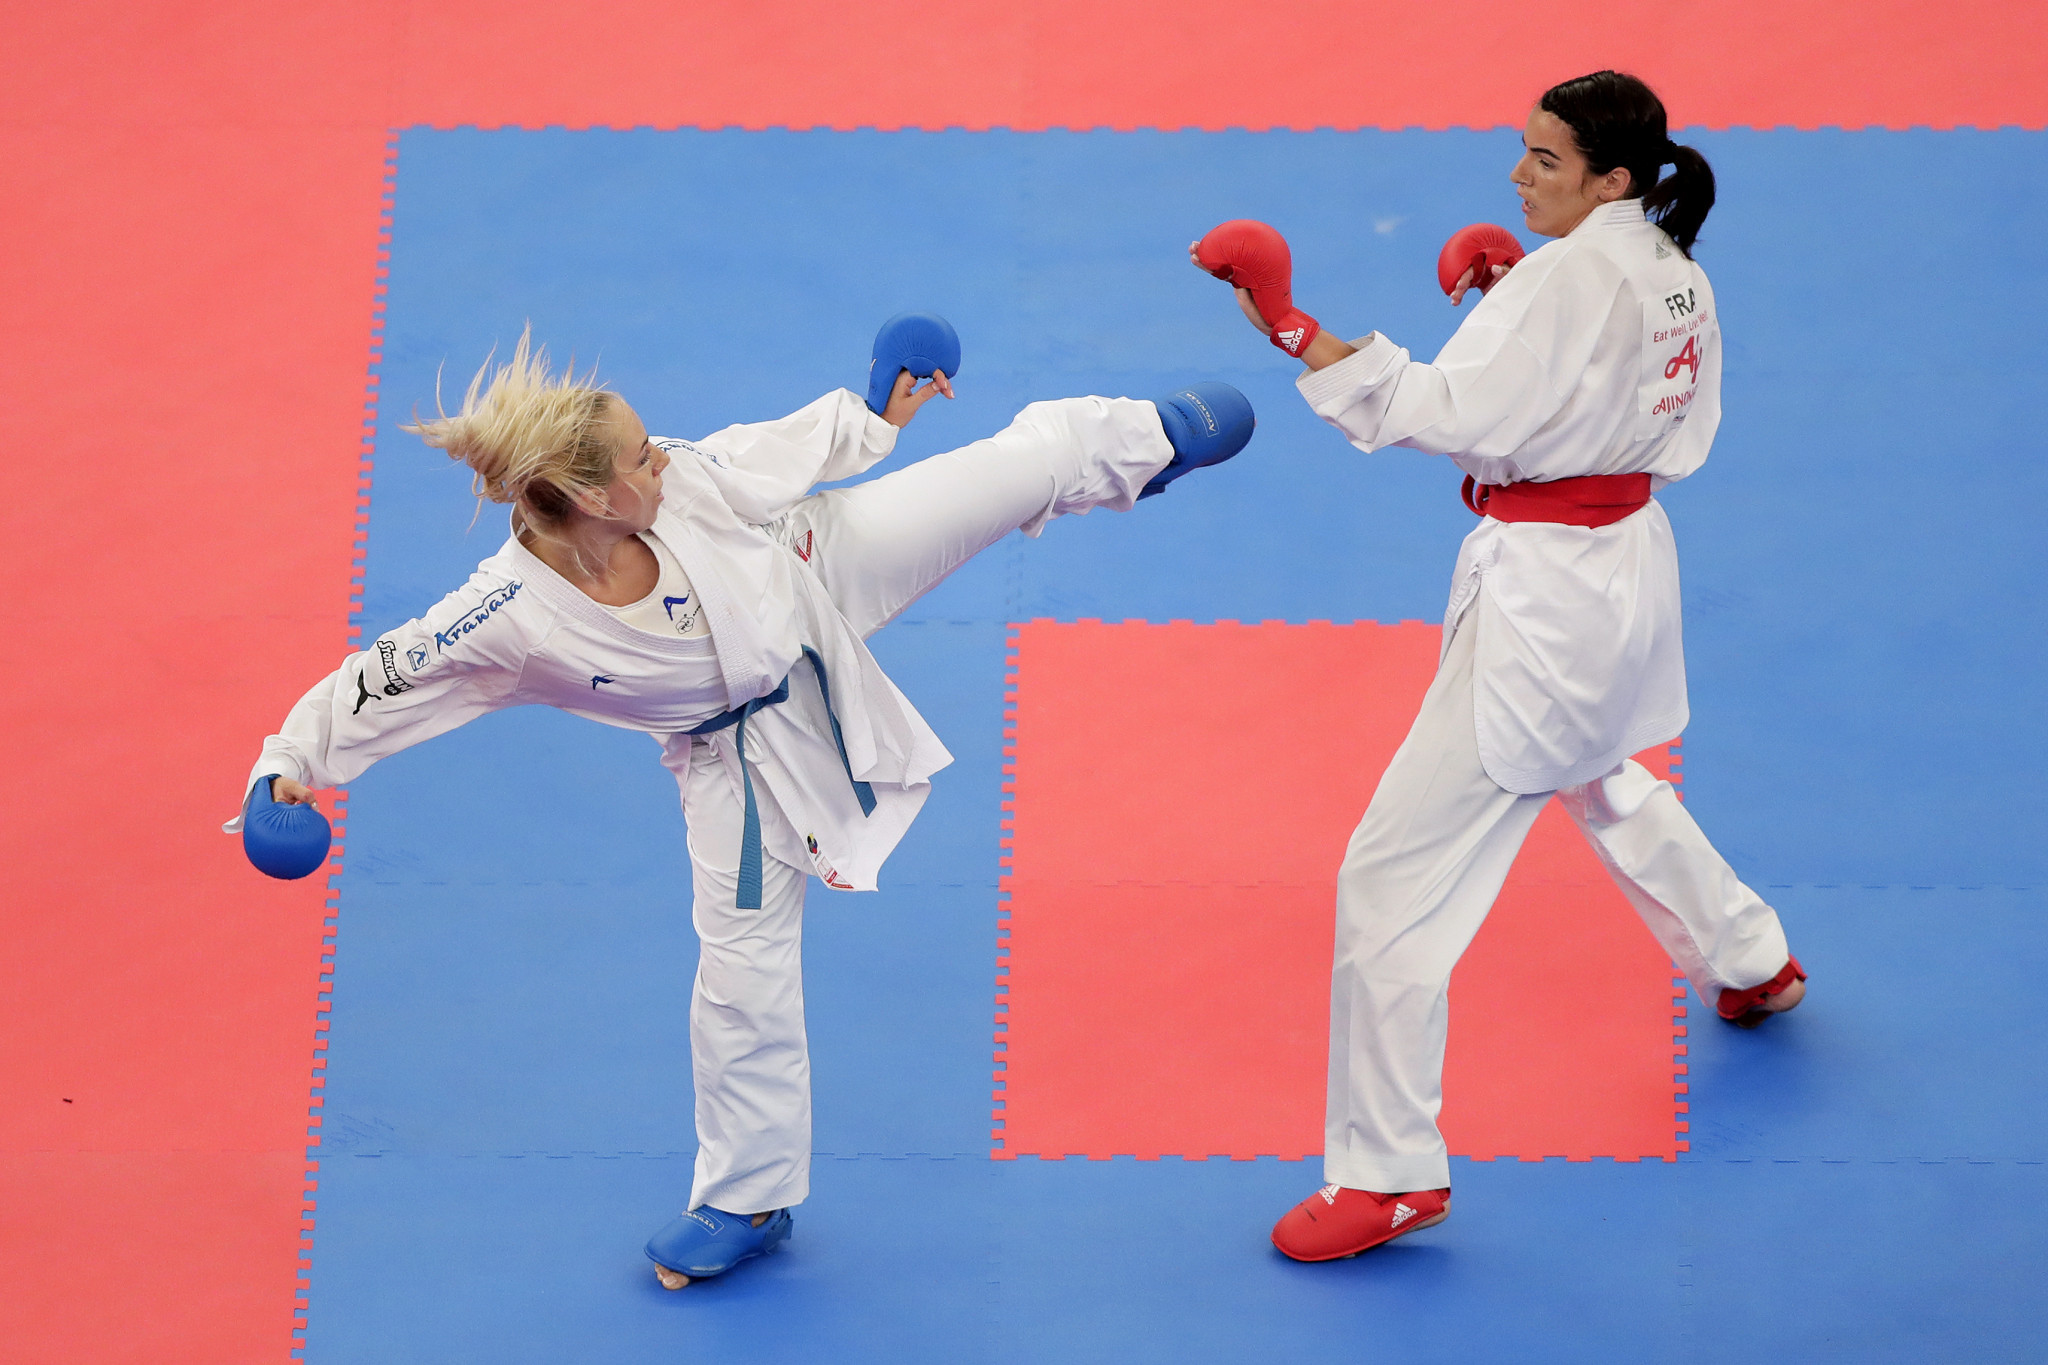 The World Karate Federation has partnered with MSM PR & Communications to make the most of its Tokyo 2020 debut ©Getty Images